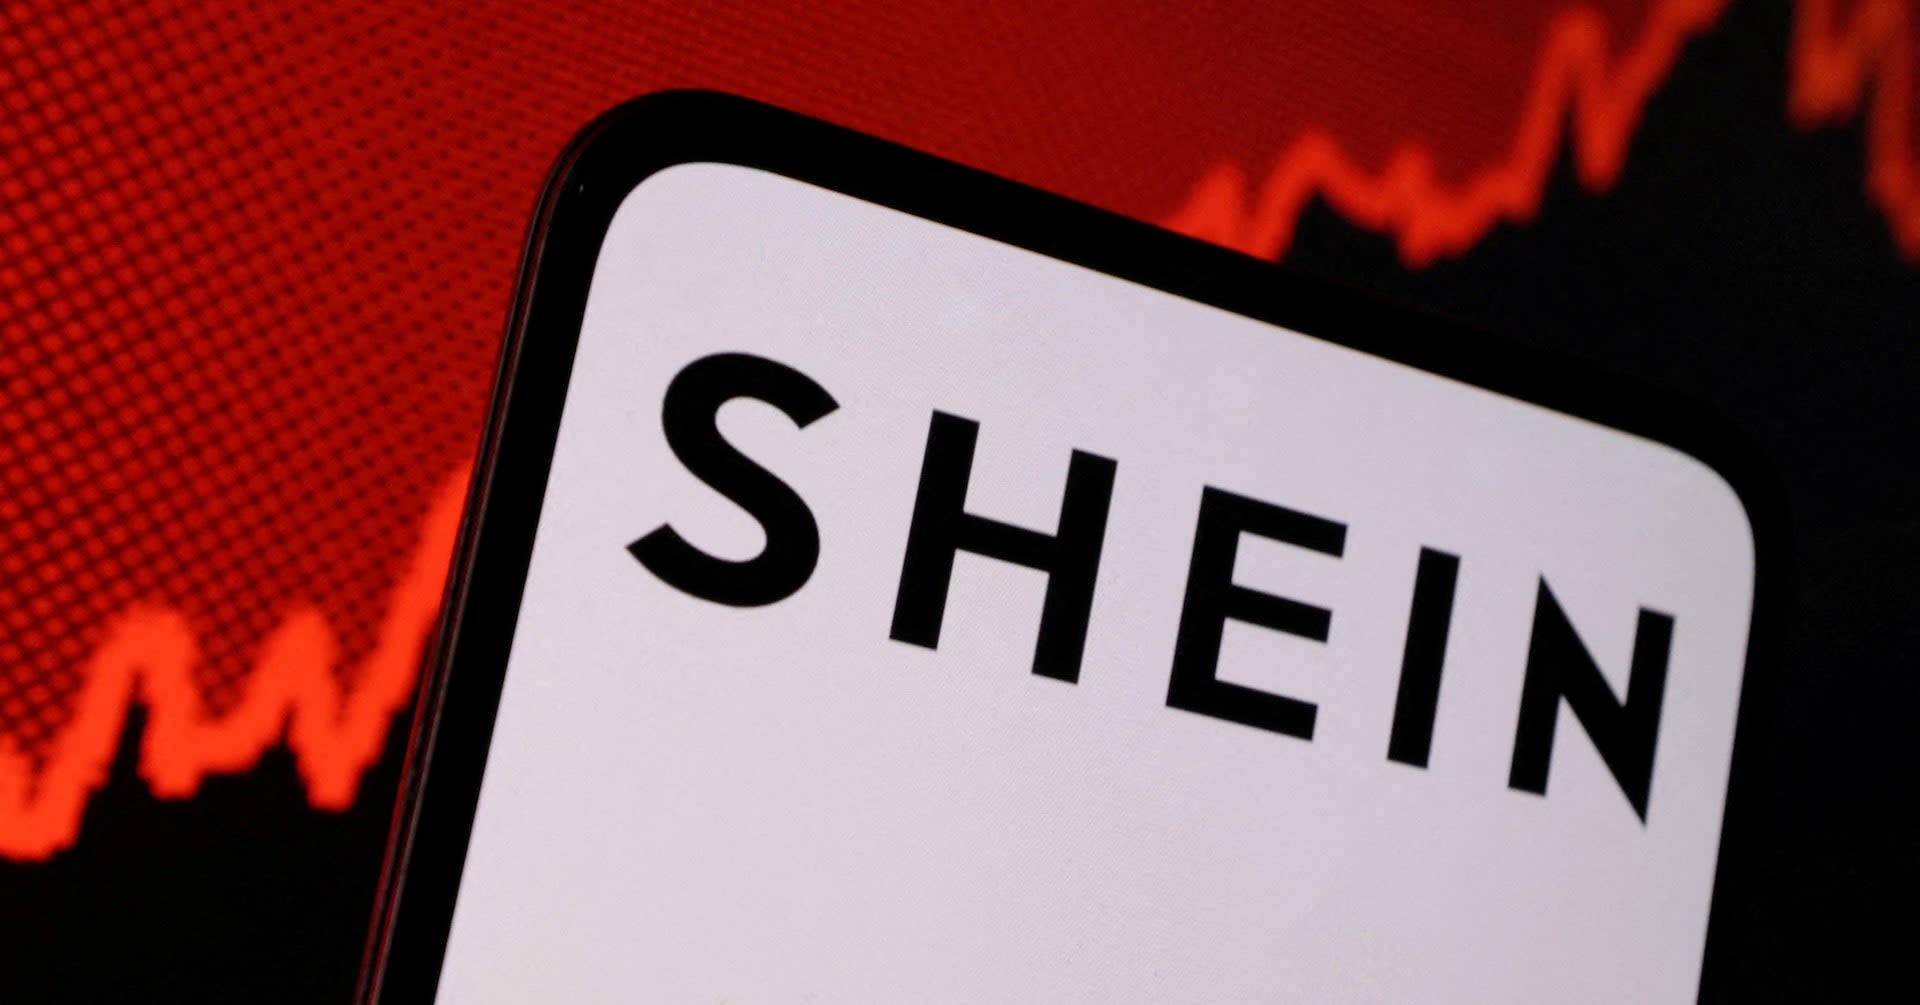 Labour Party has met with Shein ahead of potential UK listing - spokesperson